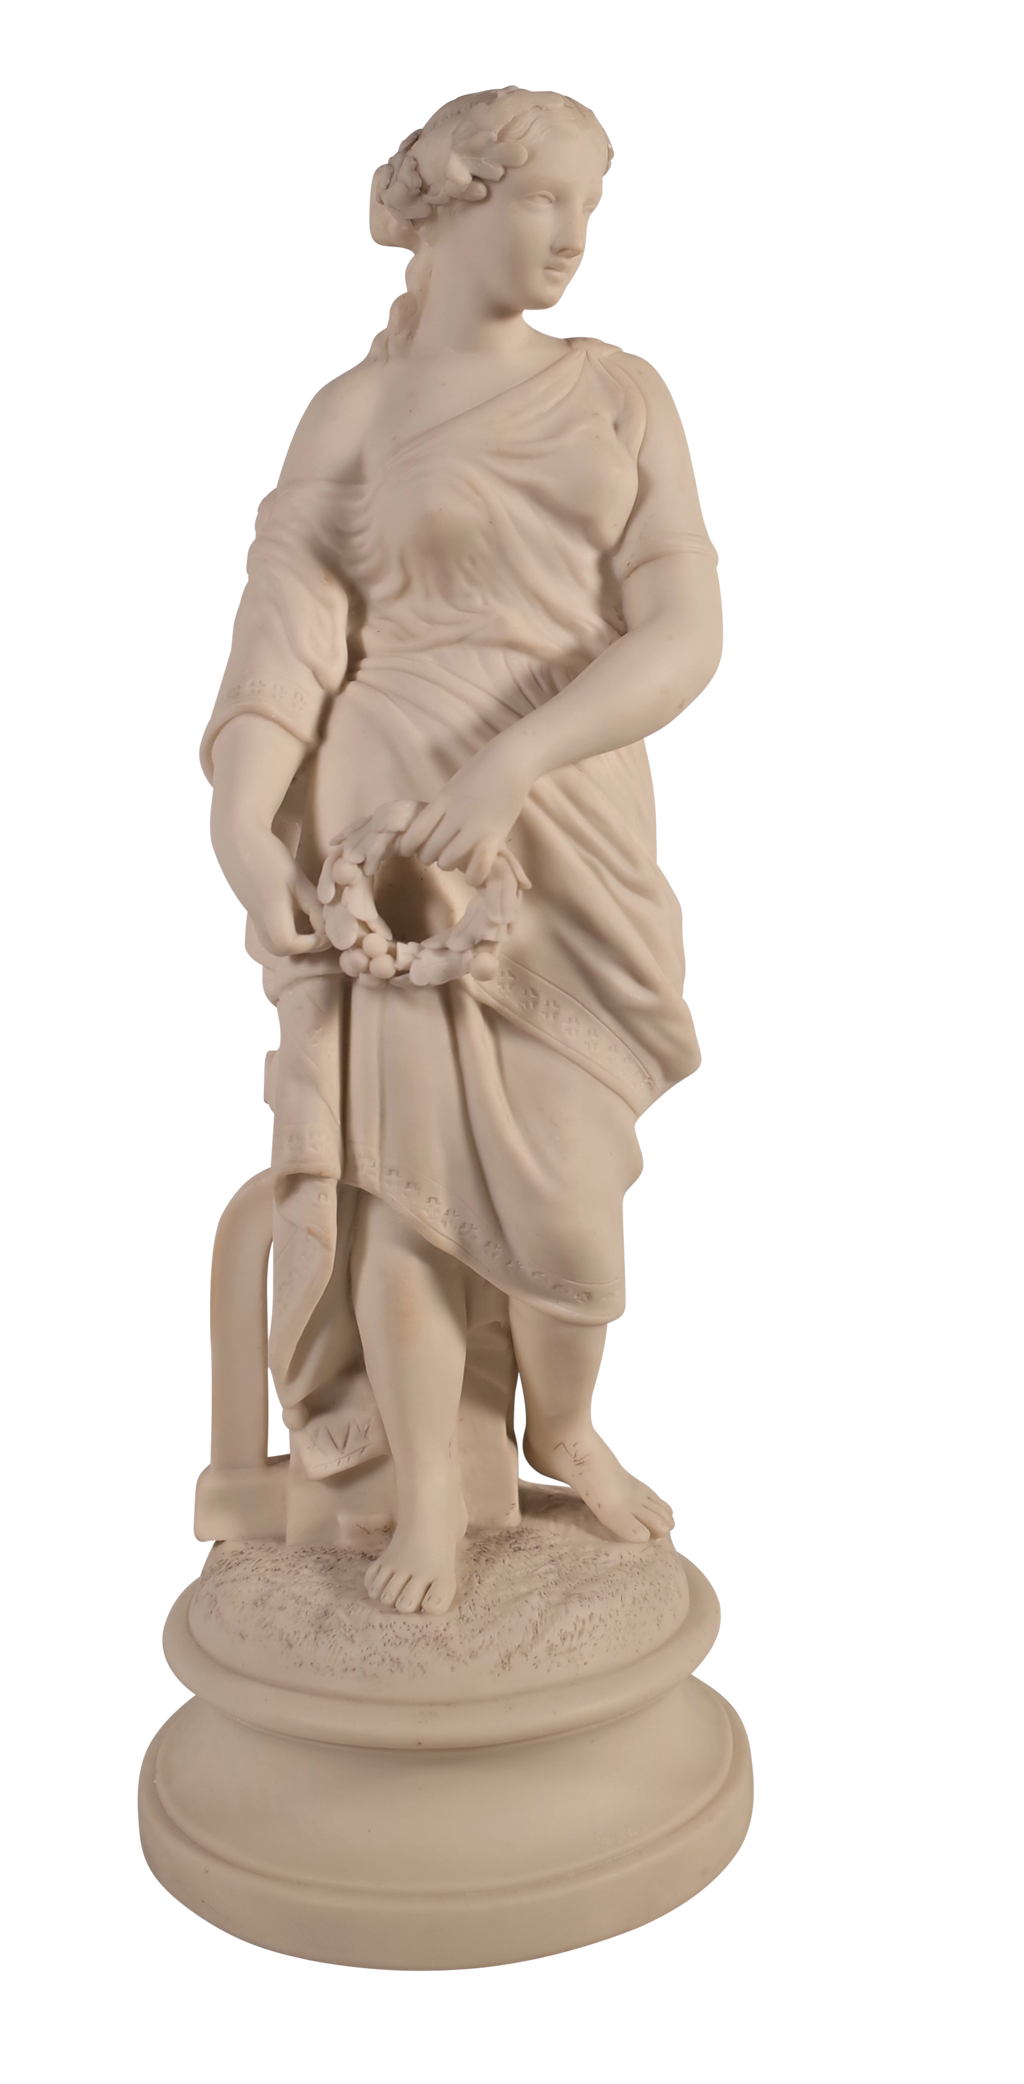 Parian Ware Figure of a Woman in Classical Robes Standing on Round Plinth and Holding a Wreath